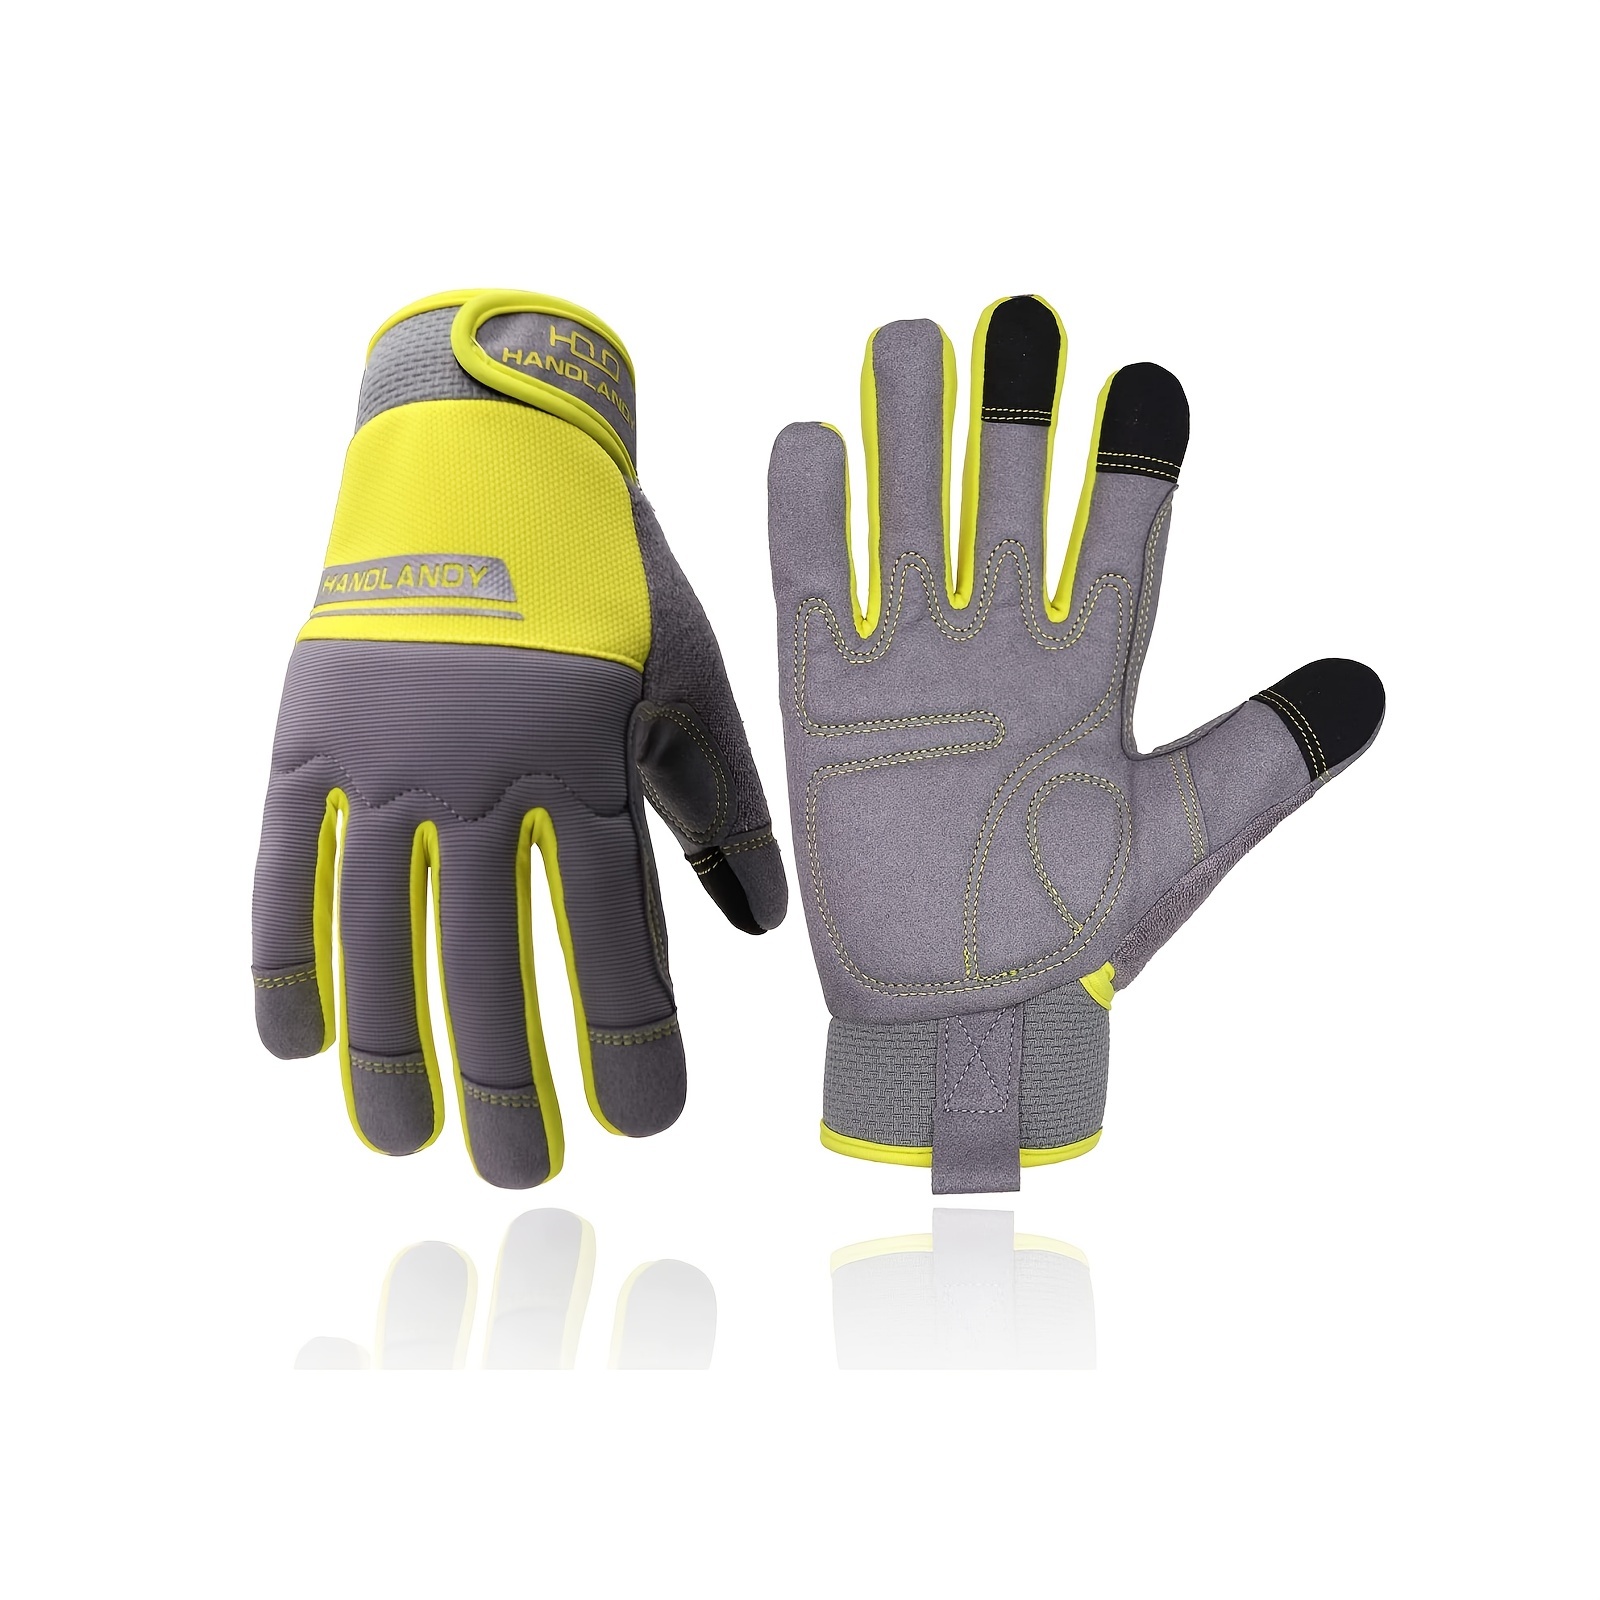 Firm Grip - General Purpose Tough Working Gloves - Touch Screen